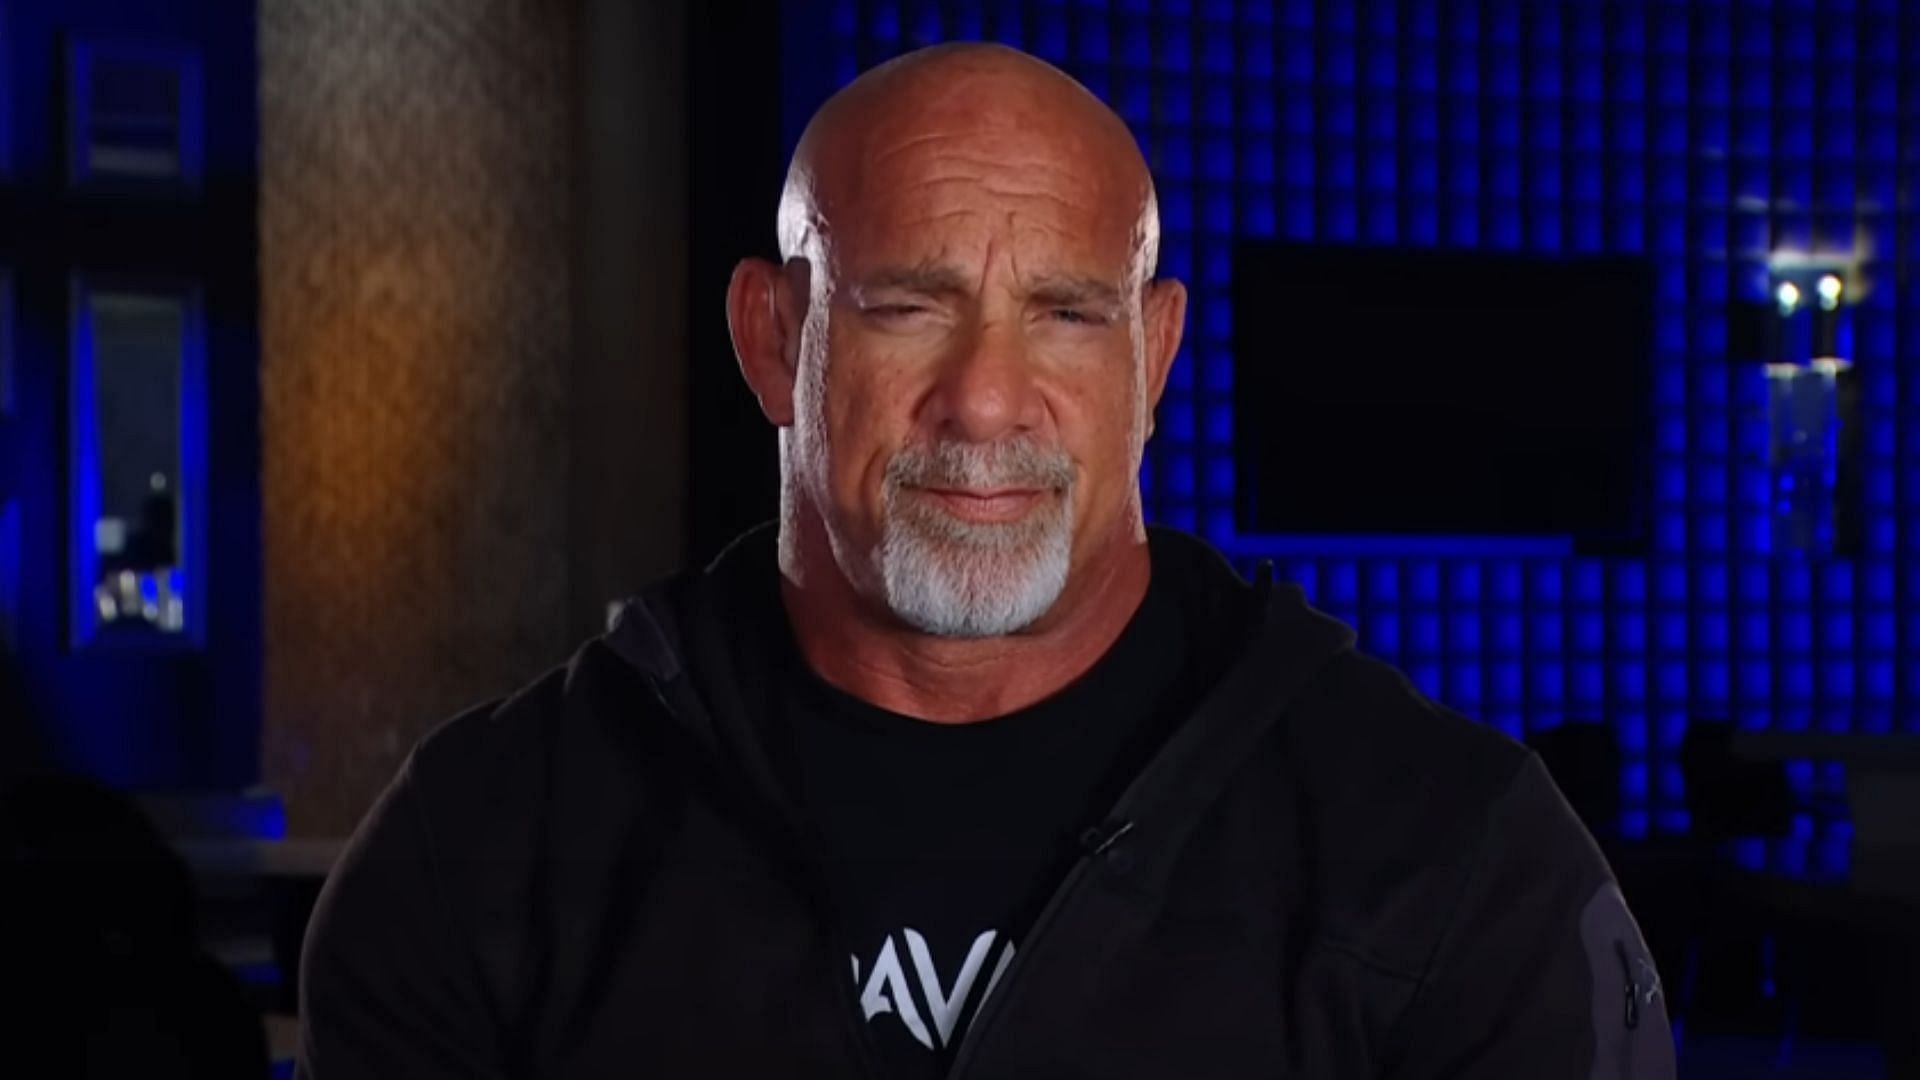 Goldberg is one of the biggest names in wrestling